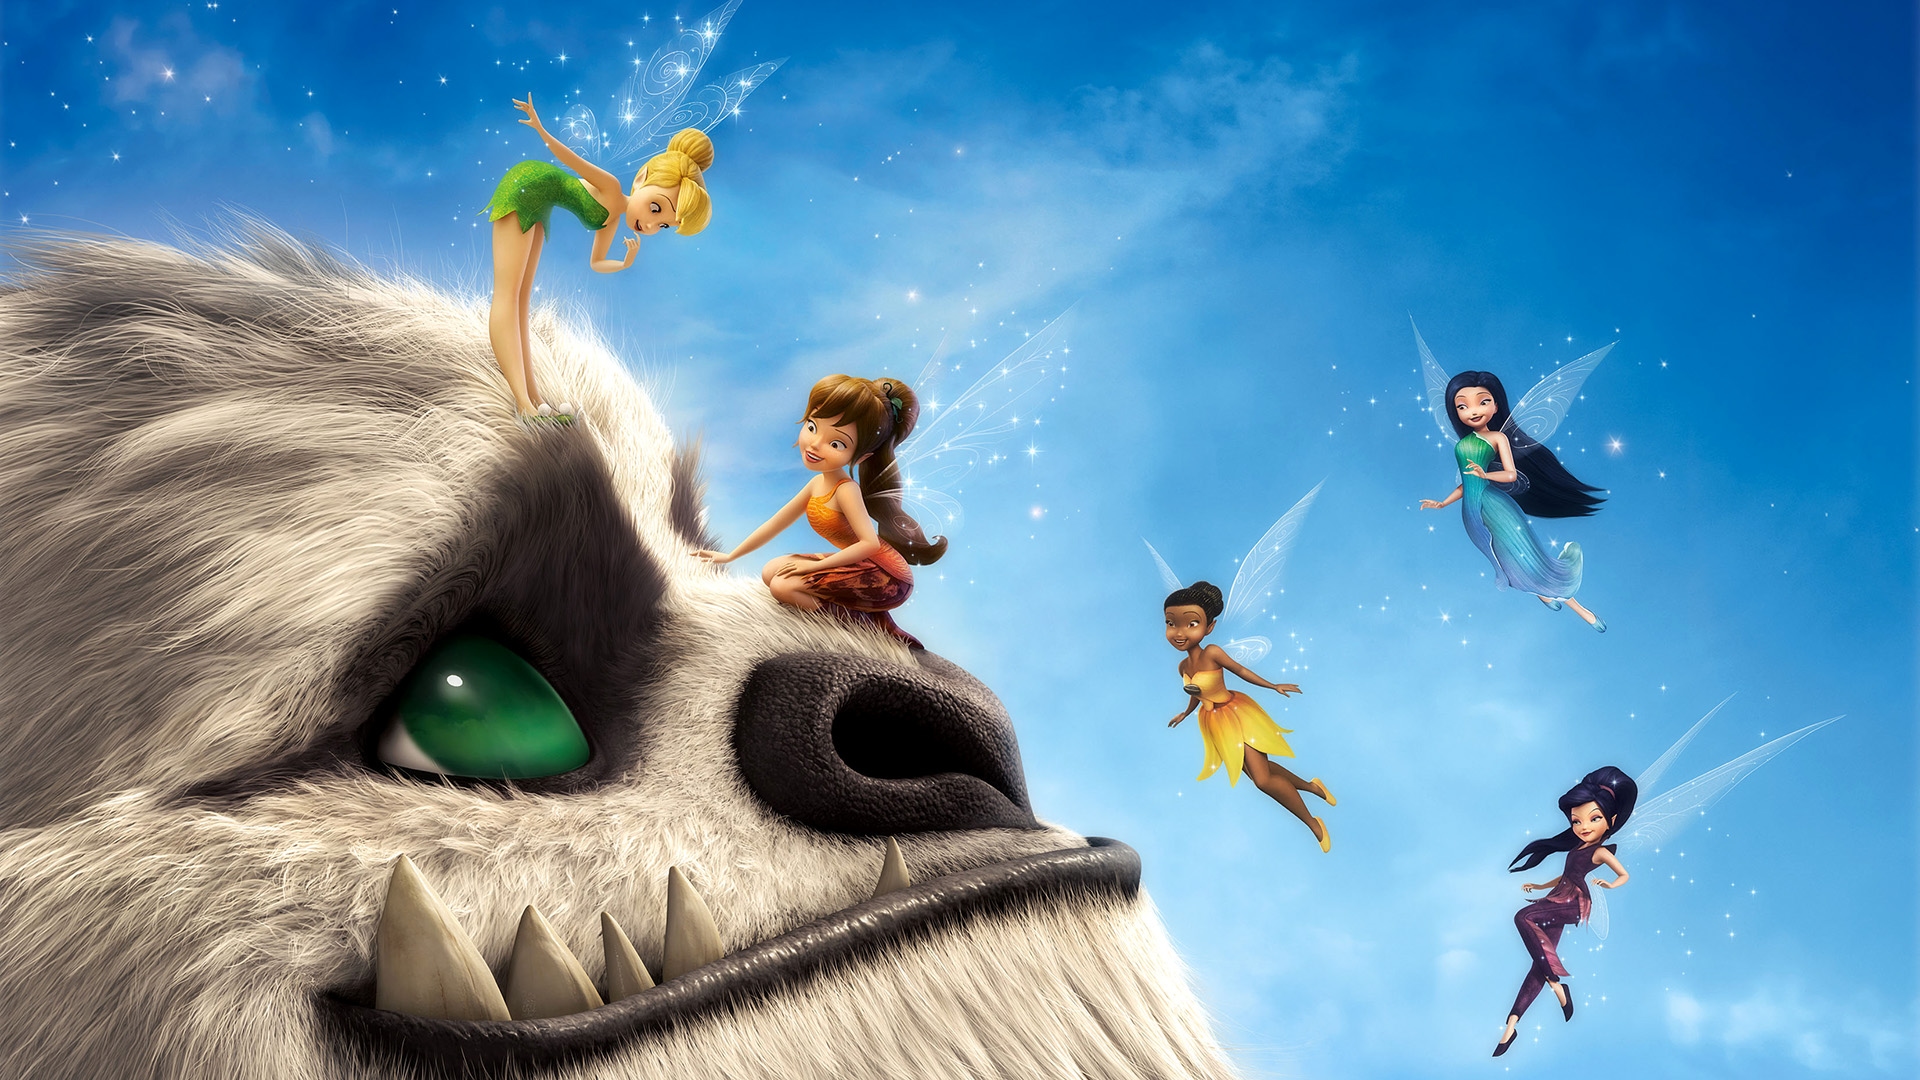 Wallpaper Tinker Bell and the Legend of the NeverBeast animated movie